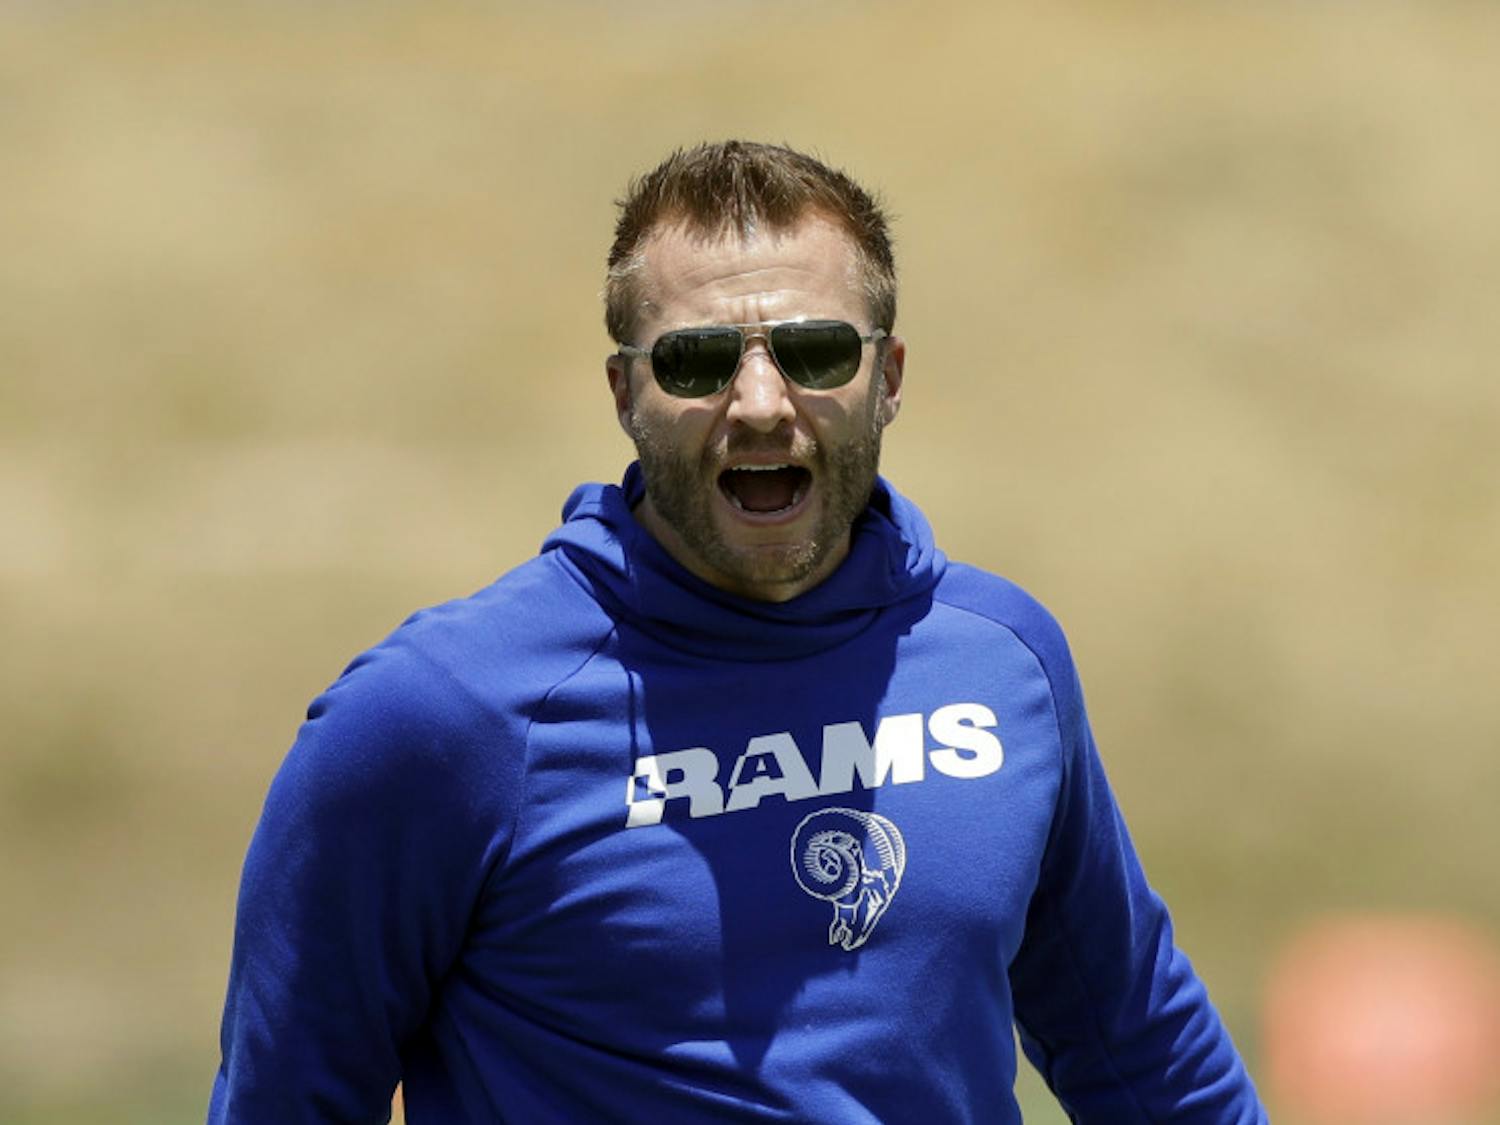 Rams coach Sean McVay led his team to a Super Bowl appearance in just his second season.